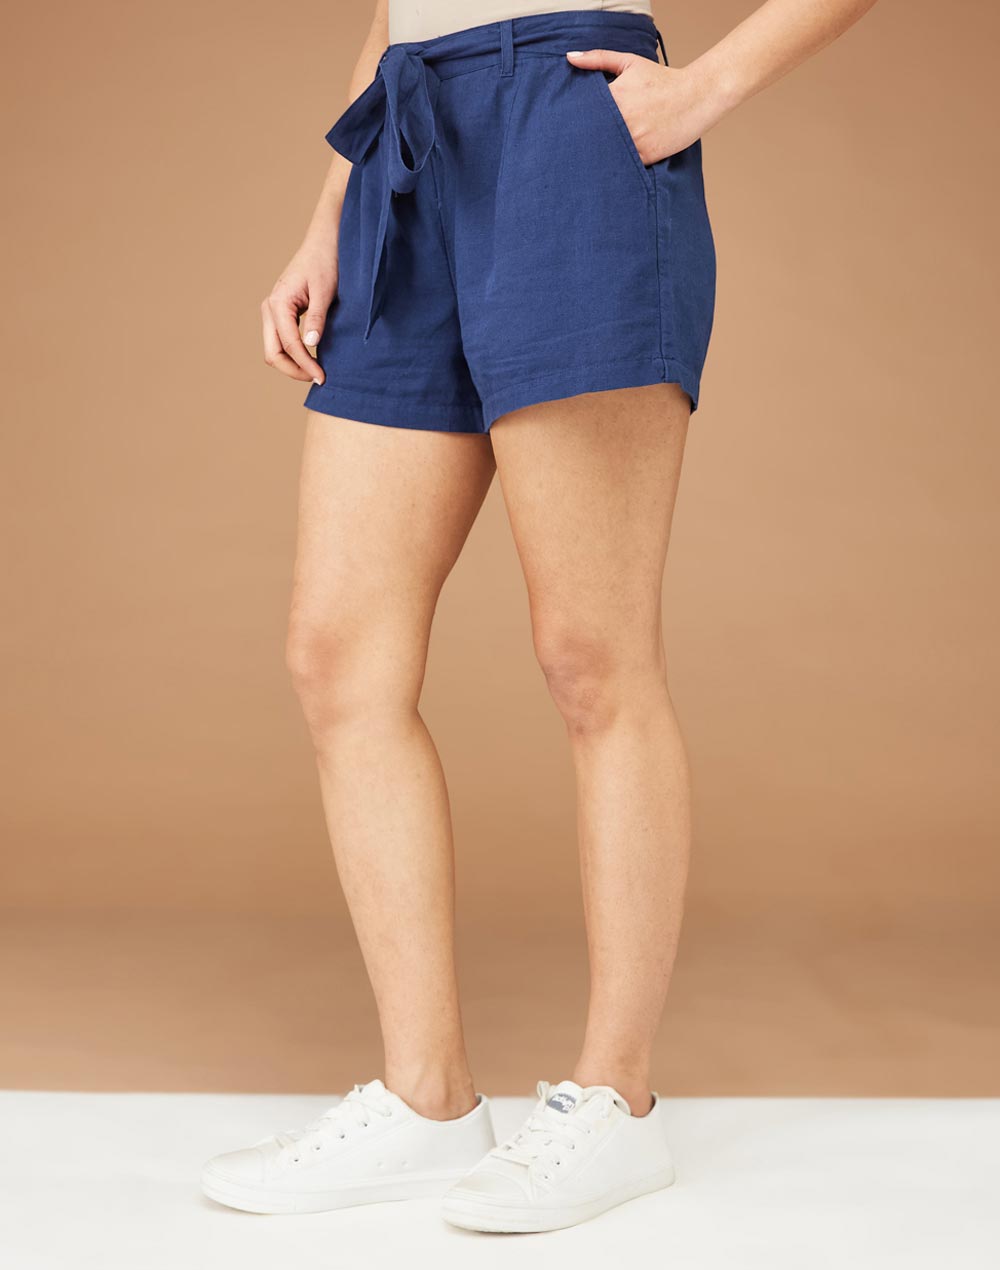 Shorts For Women Online – Buy Shorts Online in India